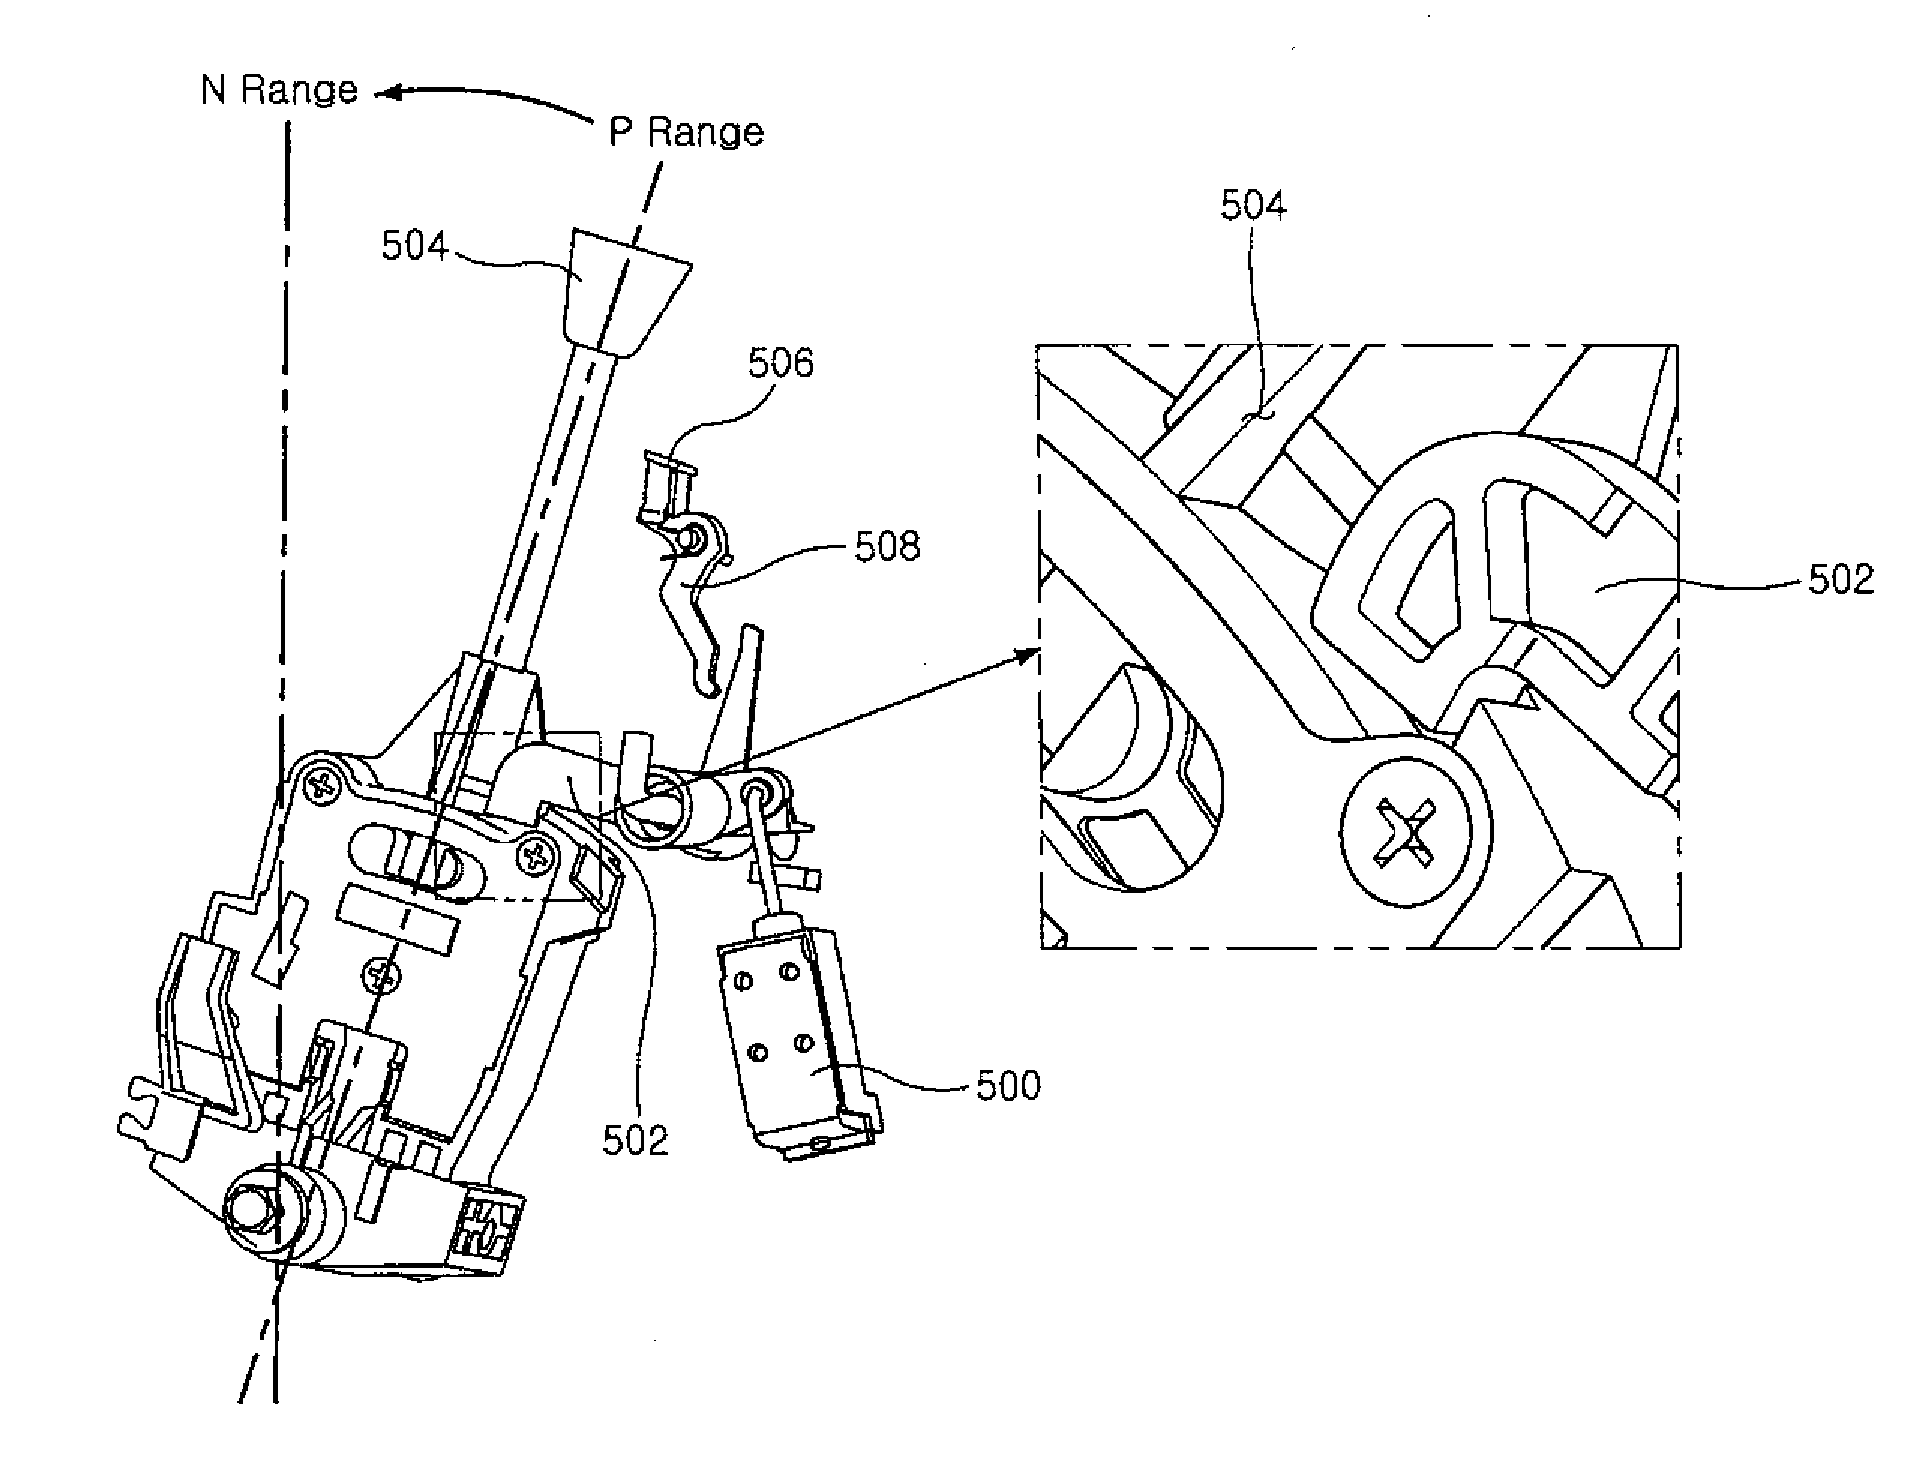 Mechanism for locking shift lever of vehicle equipped with smart key system